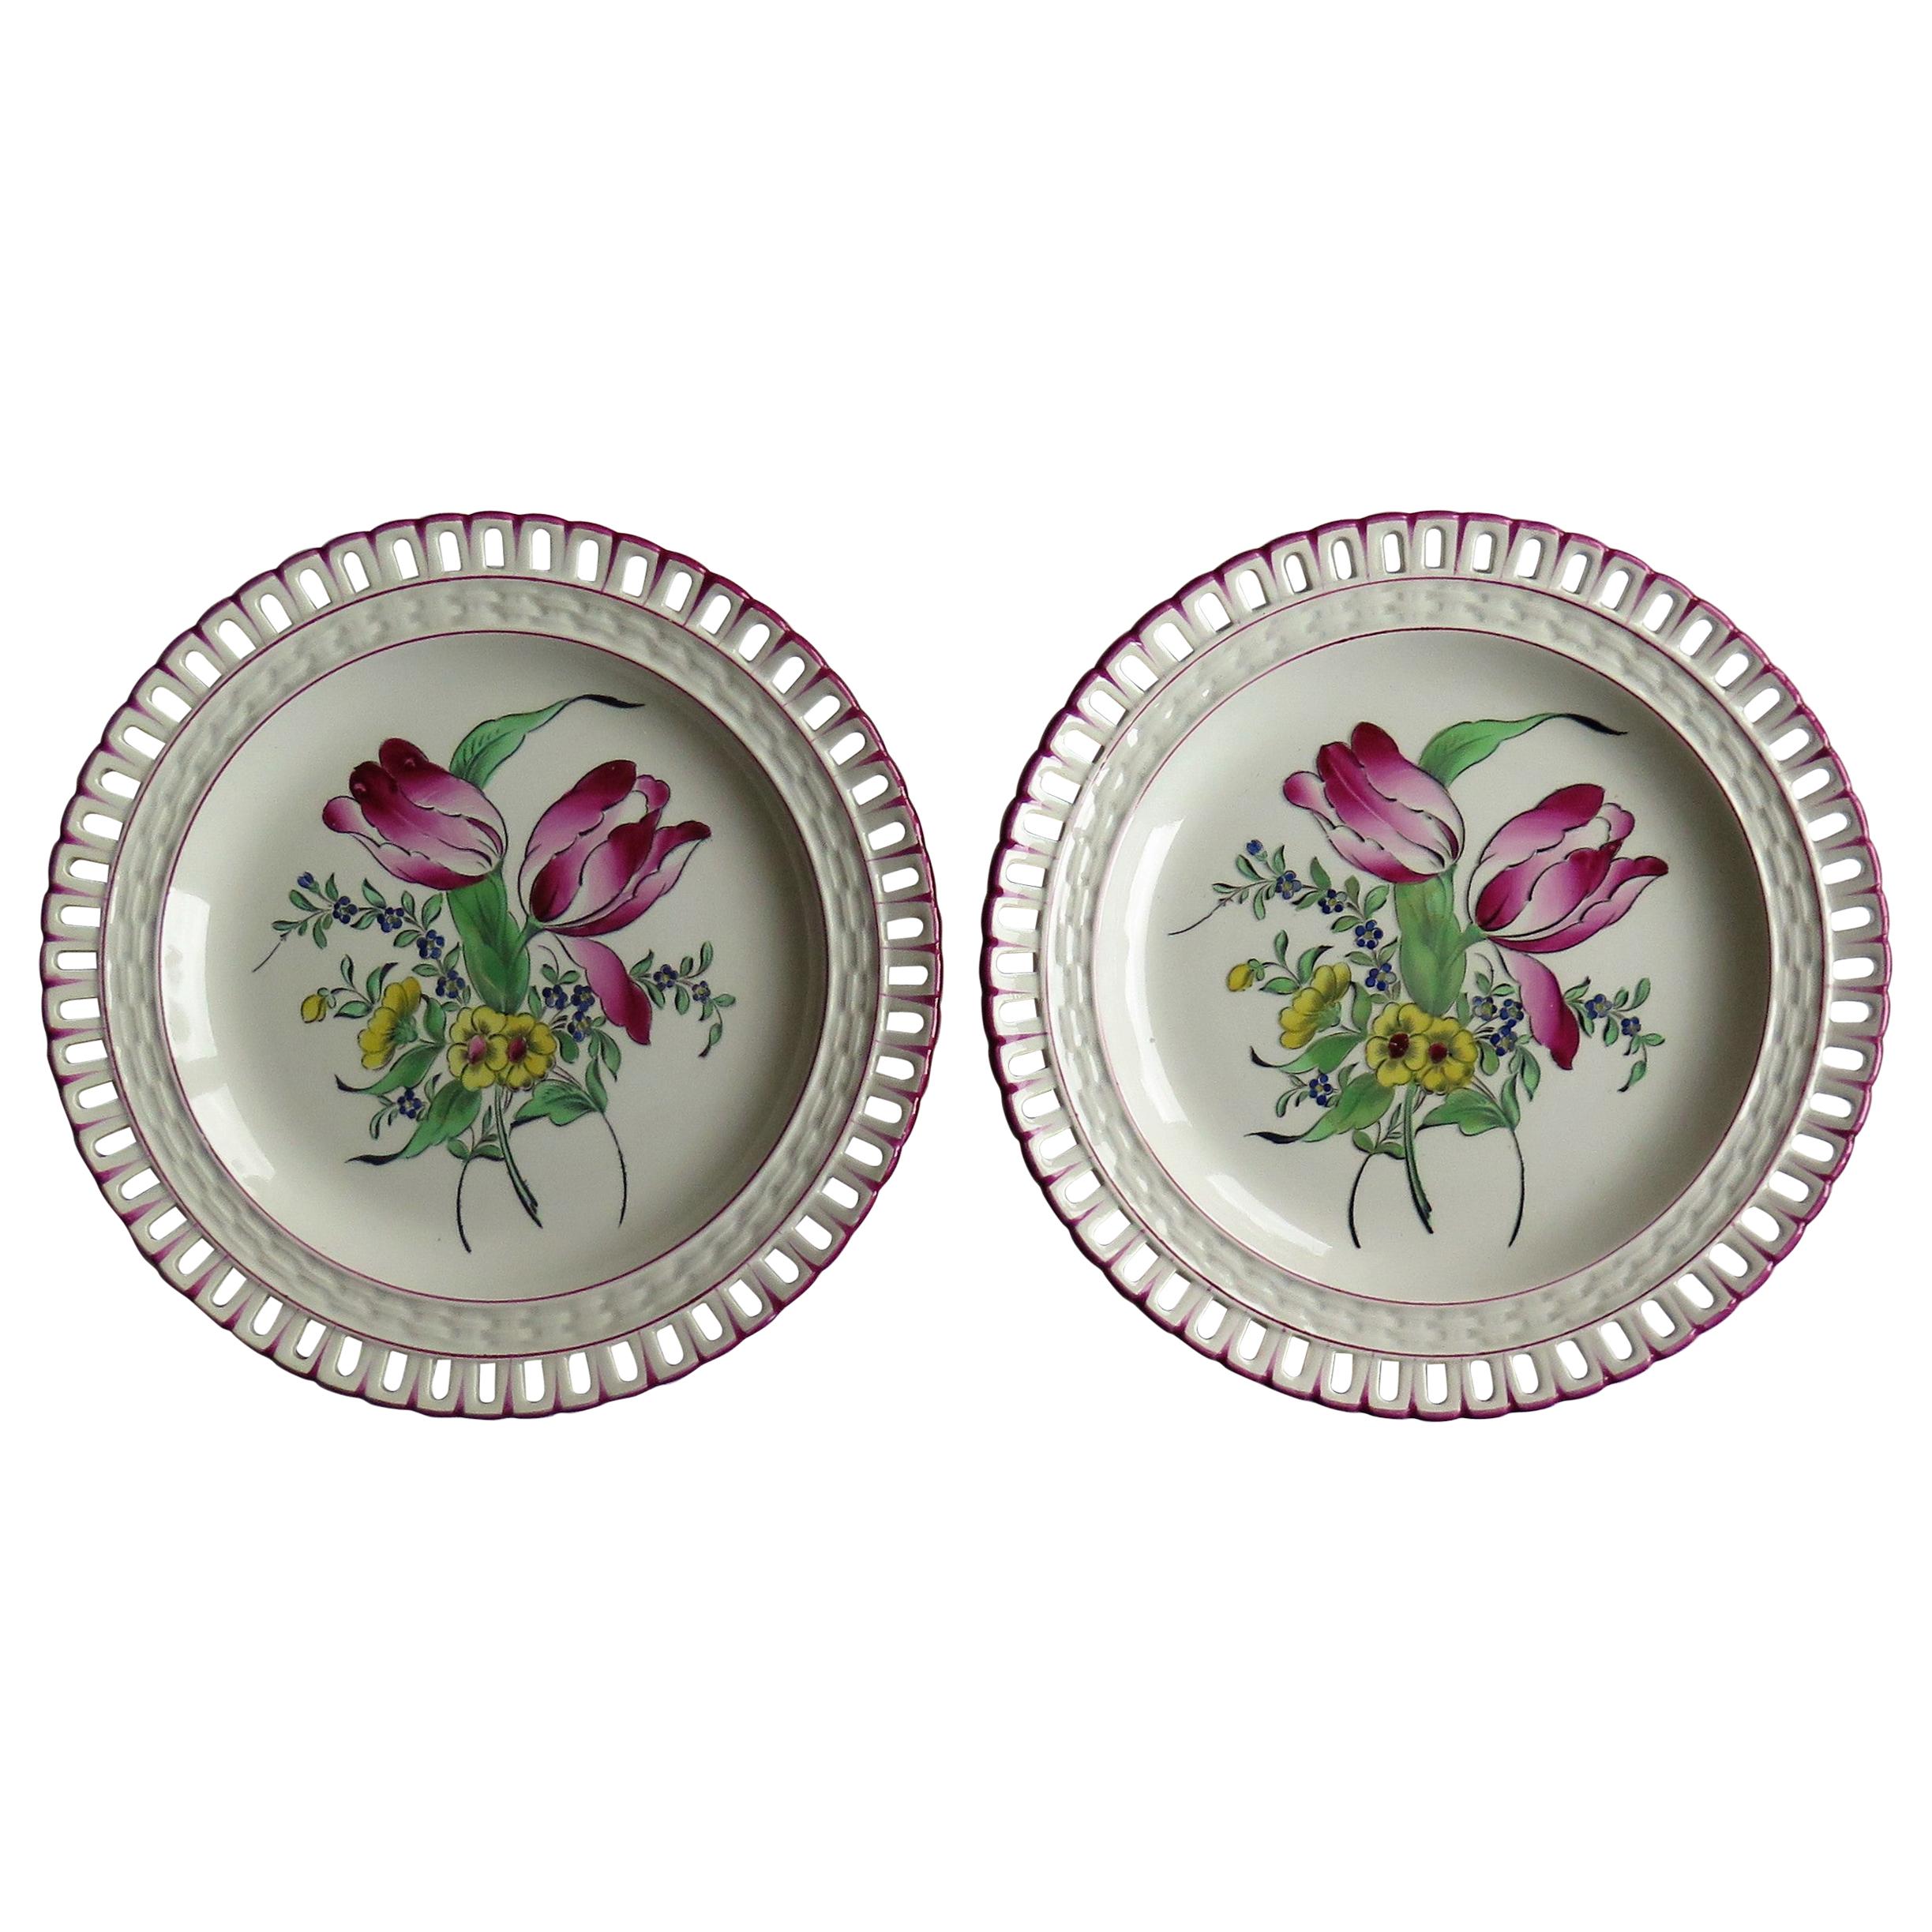 PAIR of French K&G Luneville Faience Plates Hand Painted Flowers, circa 1895